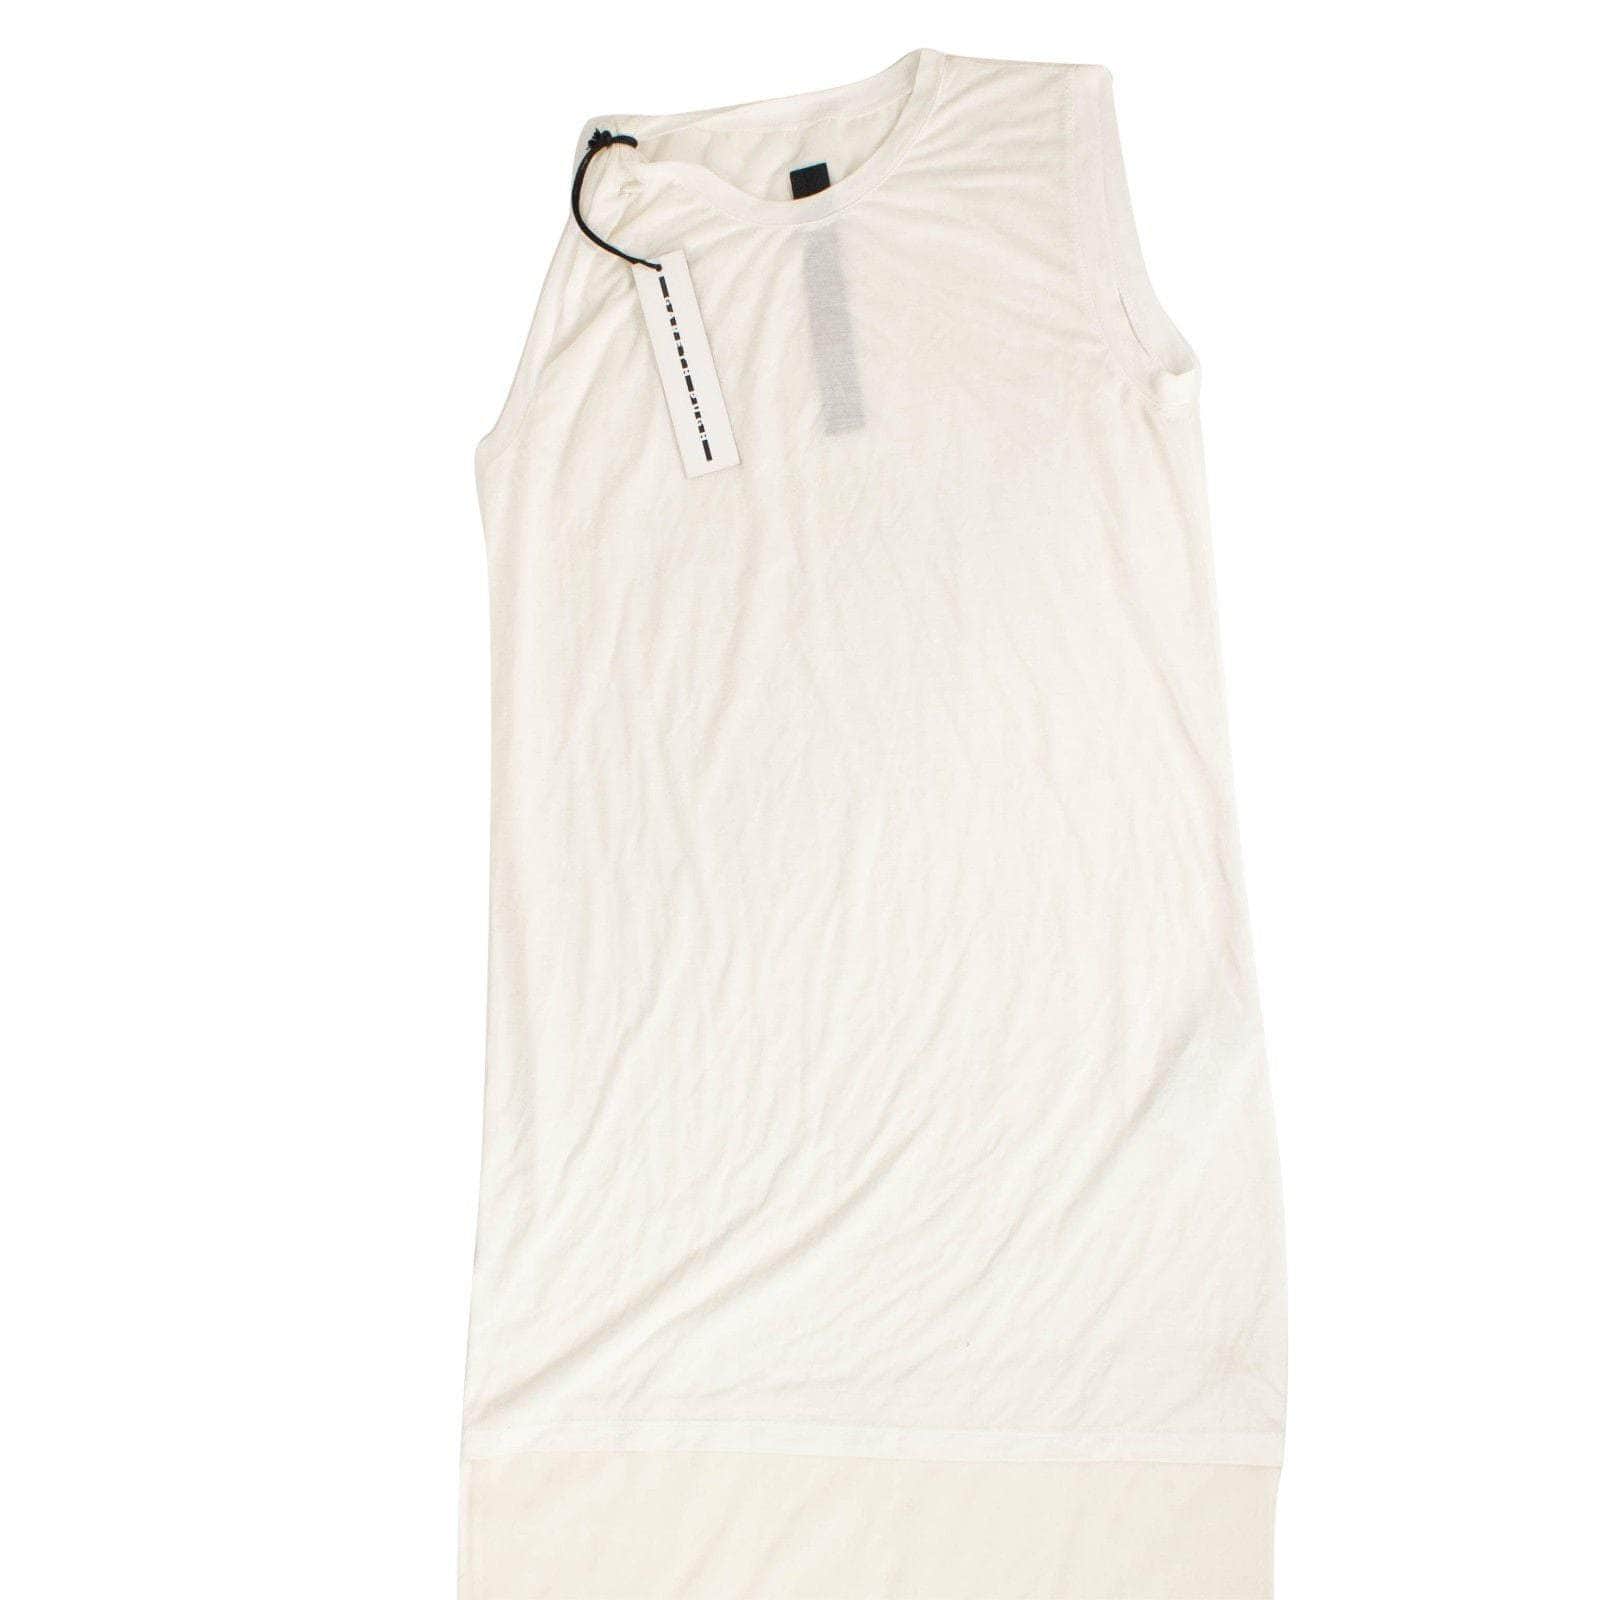 Gareth Pugh chicmi, couponcollection, gender-womens, main-clothing, size-6, under-250, womens-tank-tops 6 Woven 'Natural' Sleeveless Asymmetrical Long Top 58LE-1388/6 58LE-1388/6